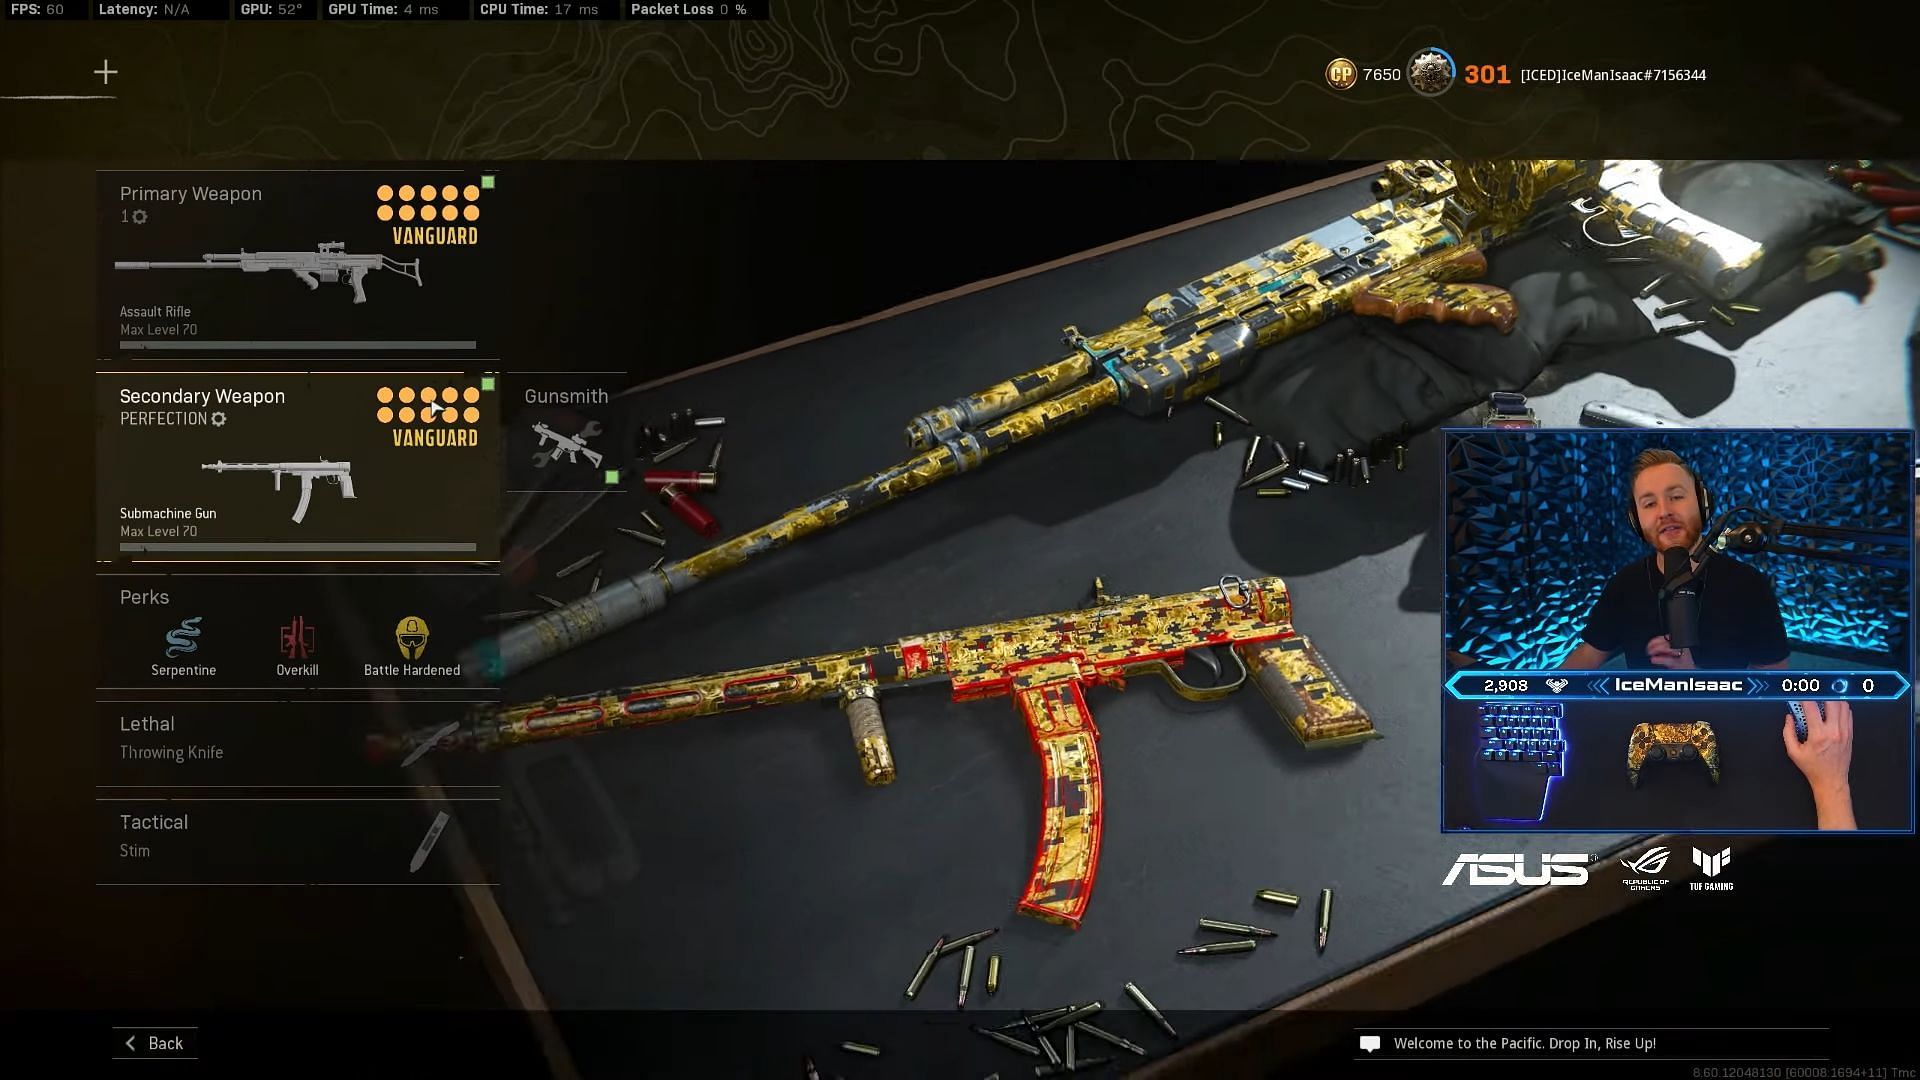 A complete KG M40 loadout (Image via YouTube/IceManIssac)